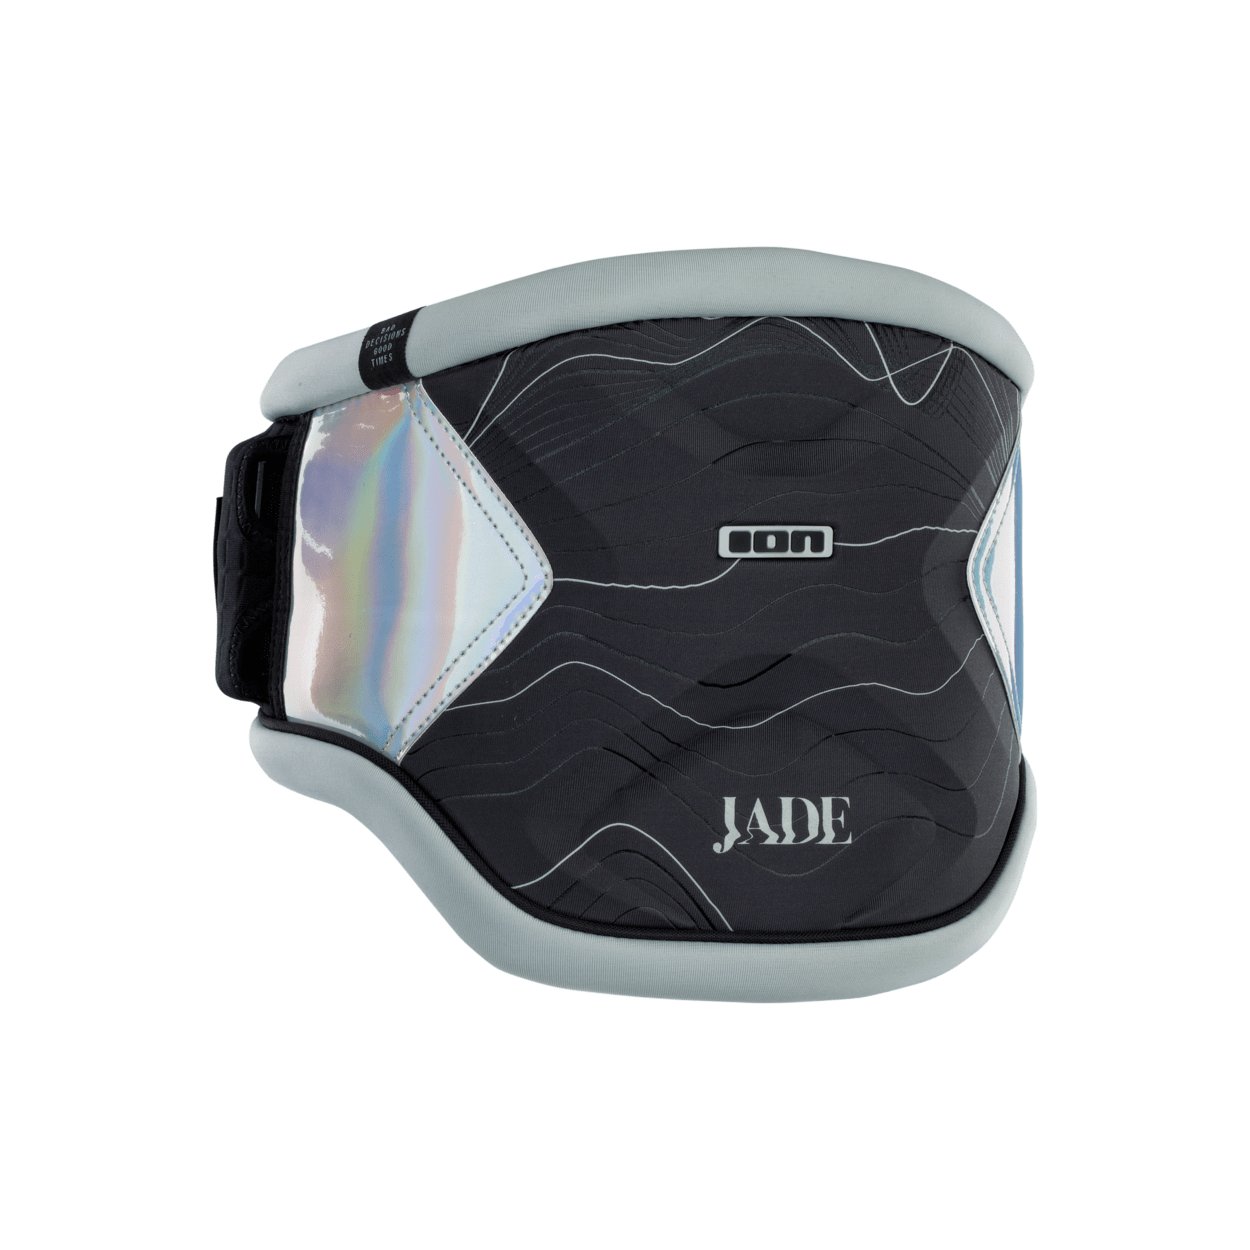 ION Jade 6 2021 - Worthing Watersports - 9008415943098 - Harness - ION Water